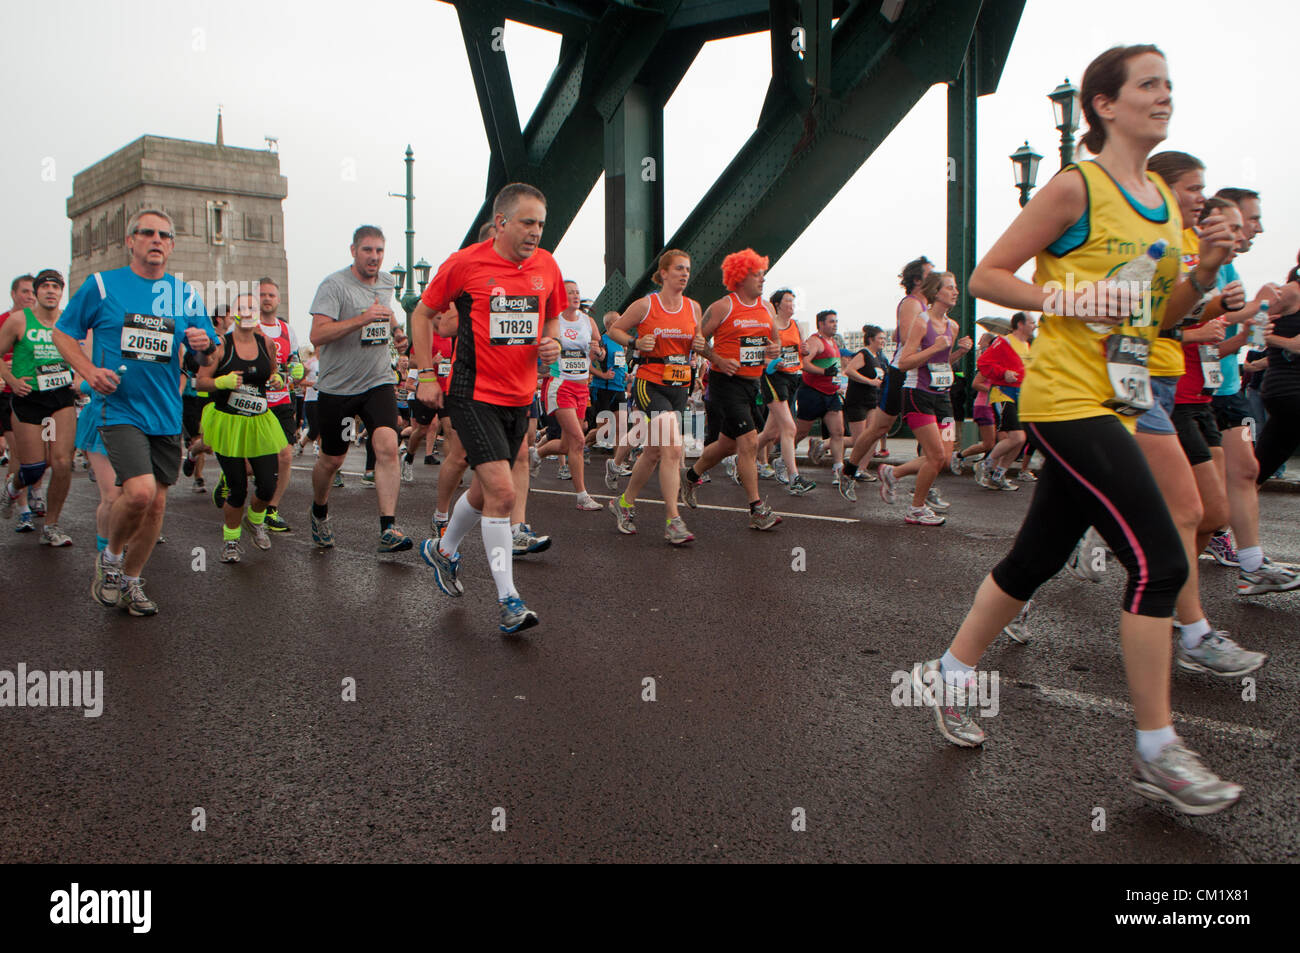 Newcastle, UK, Sunday September 16th, 2012. Runners take part in the 2012 Great North Run in Newcastle Upon Tyne. The event attracted a record 55000 competitors this year. Stock Photo